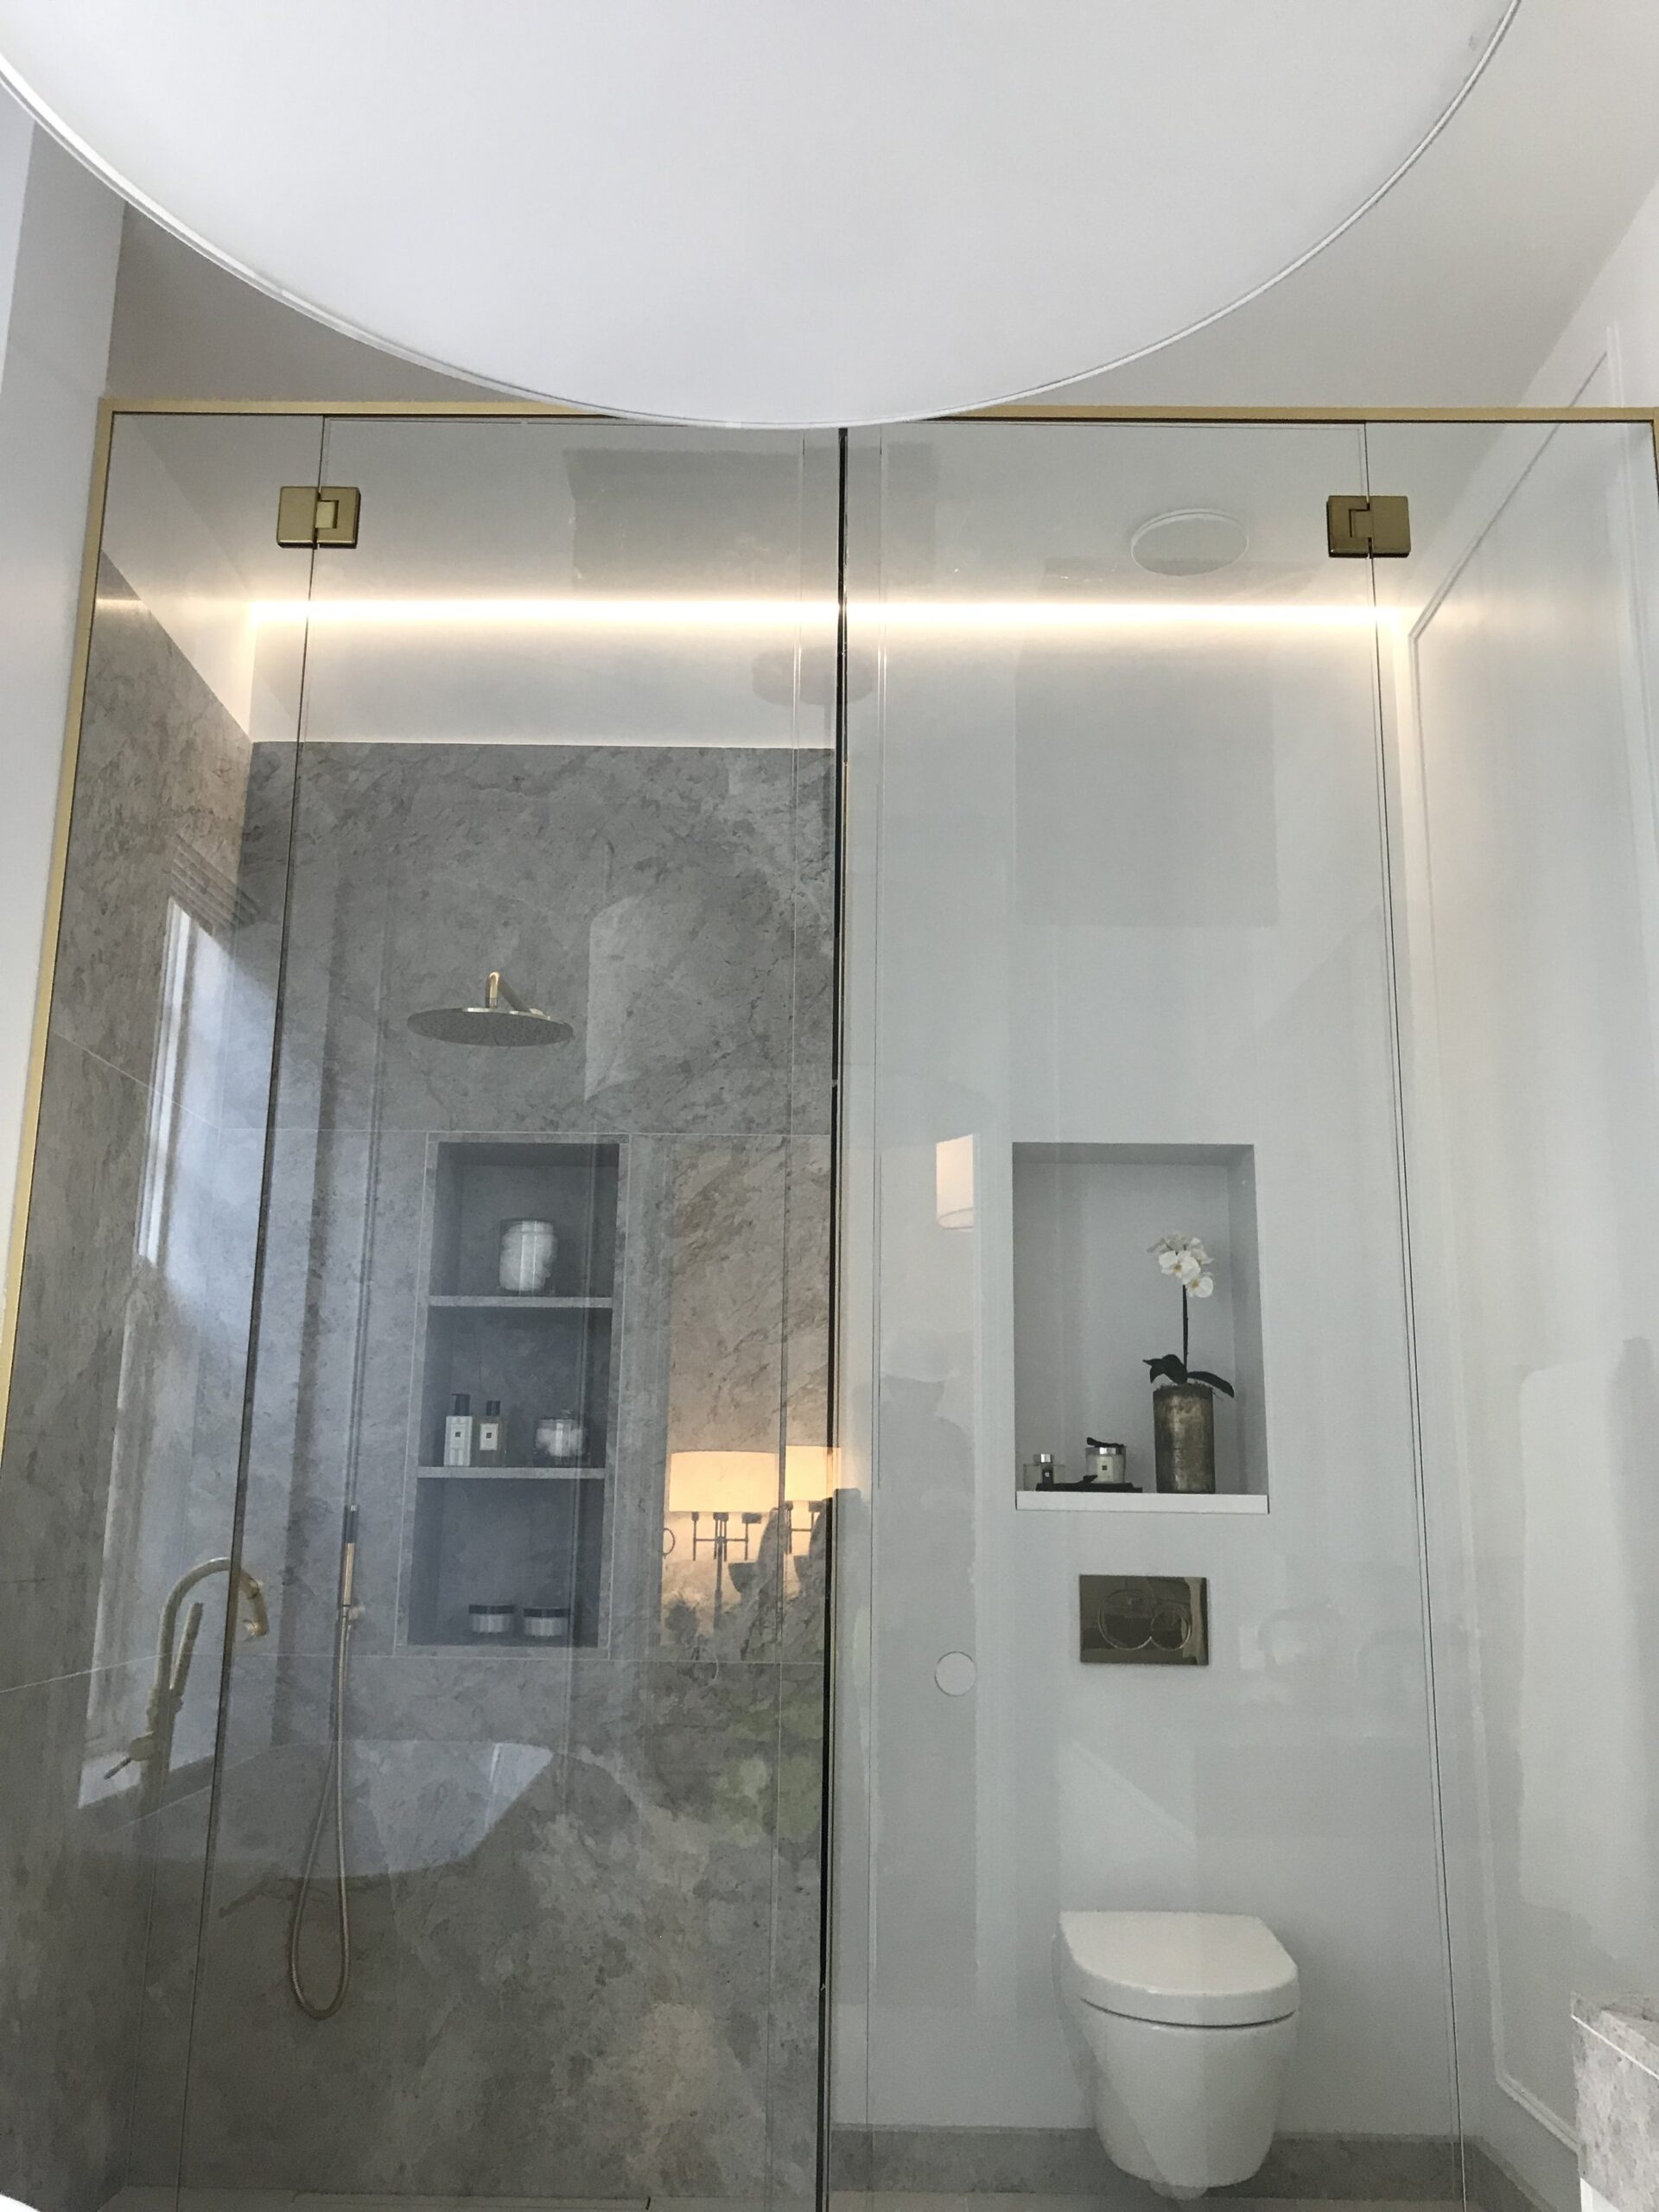 Modern bathroom with glass screen across the toilet and shower